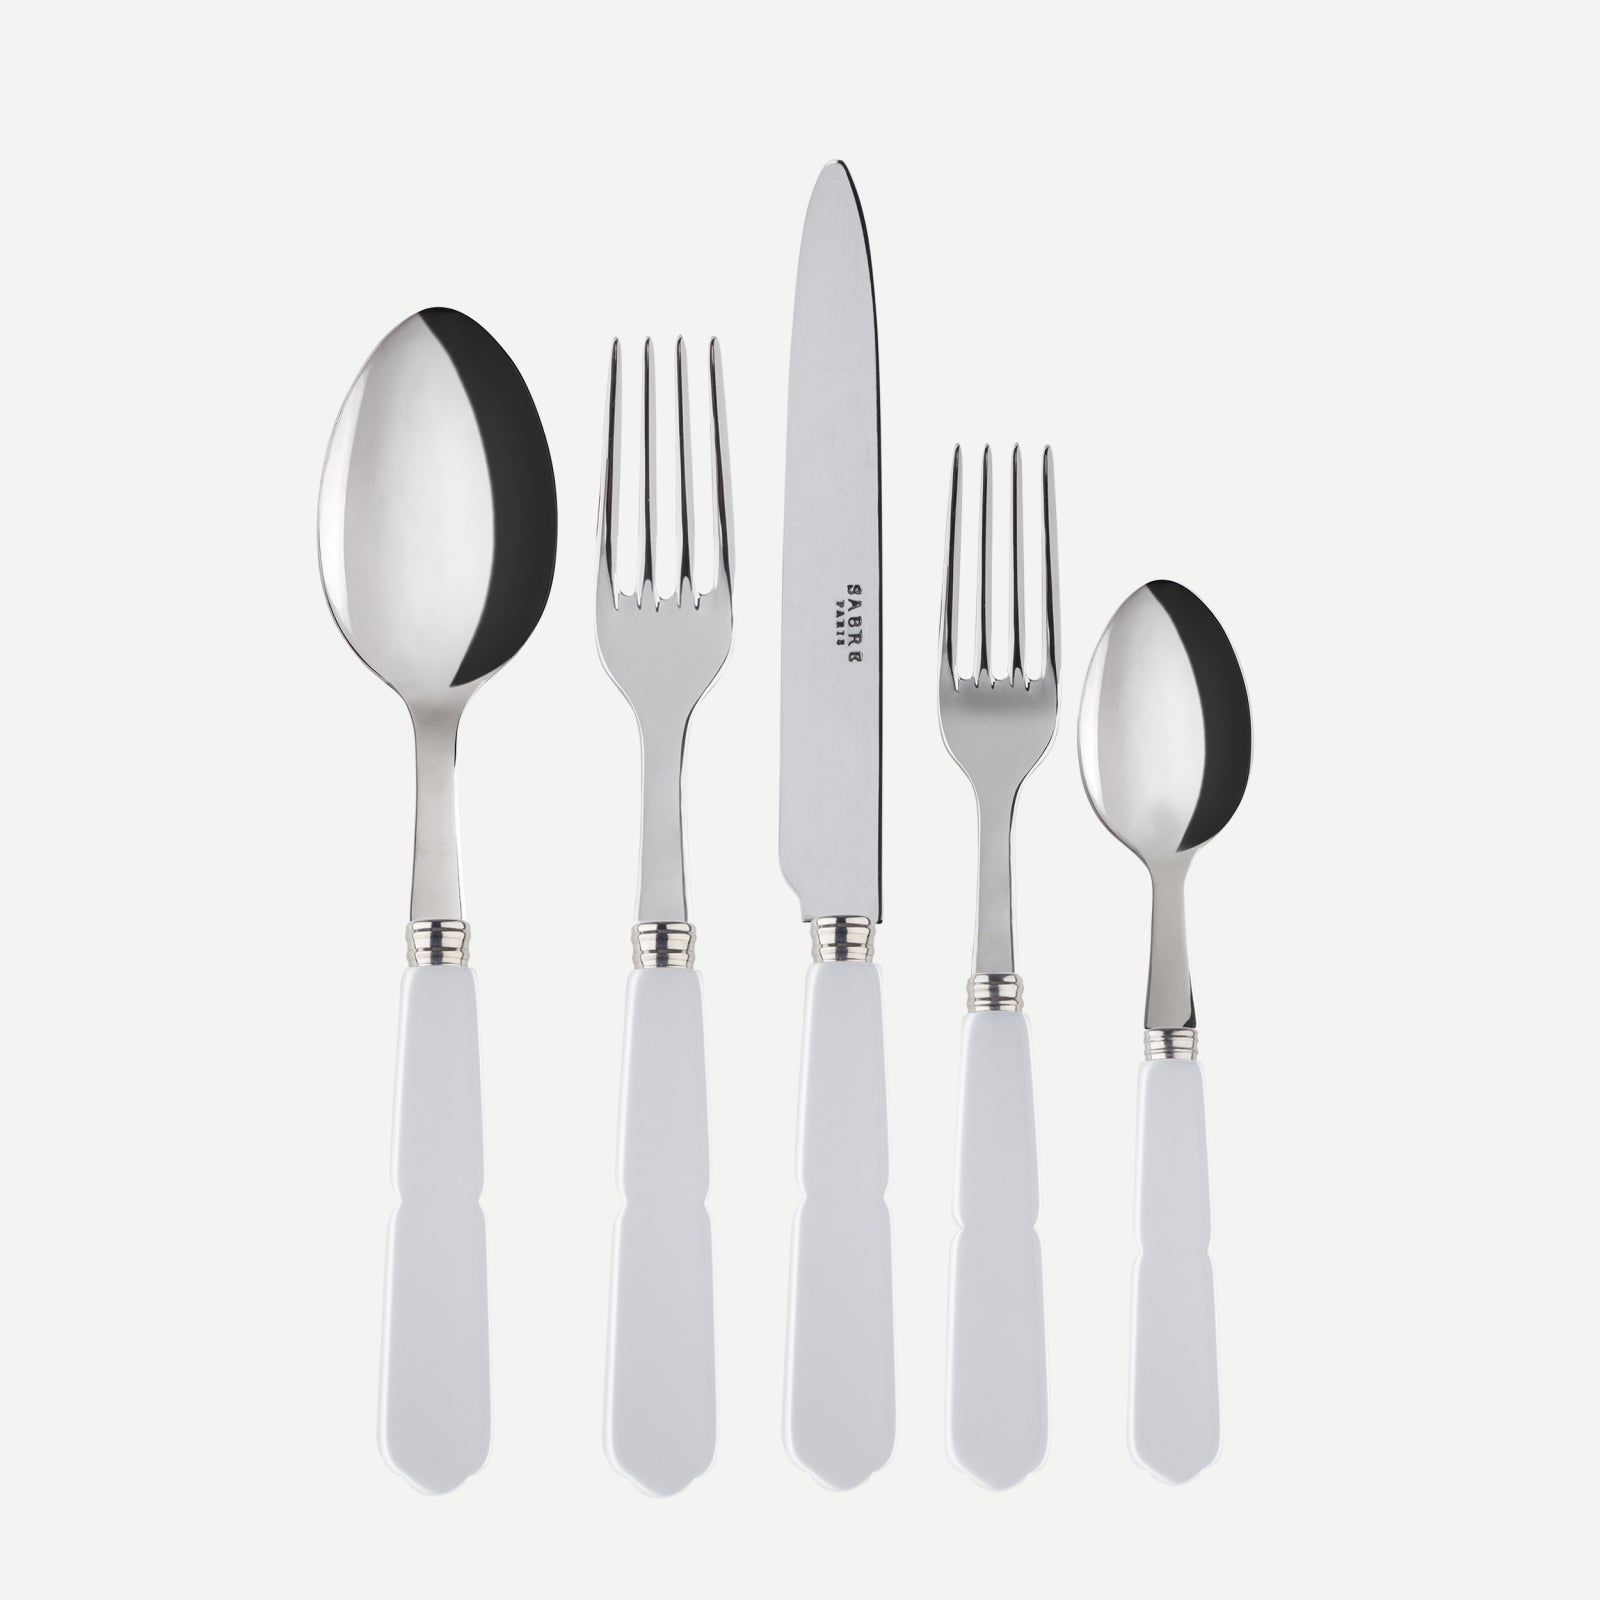 5 pieces set - Gustave - White